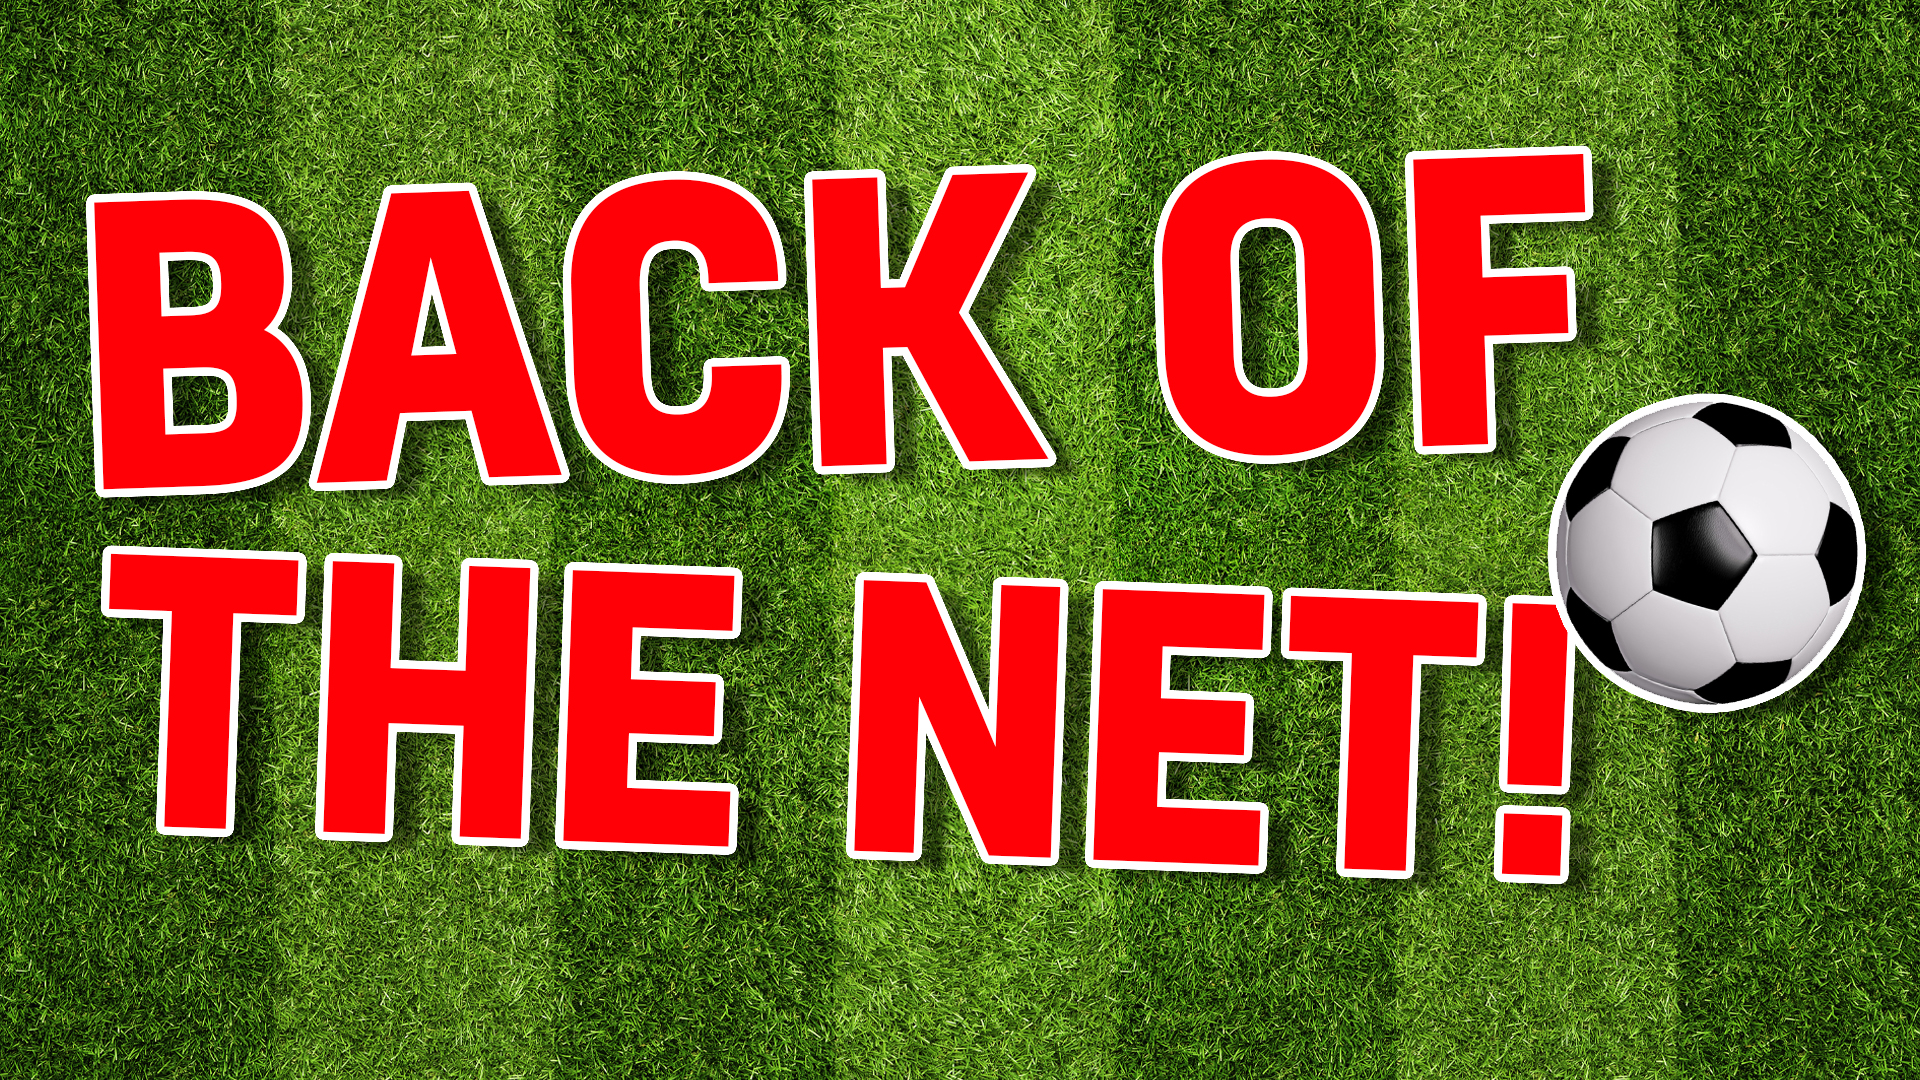 Back of the net